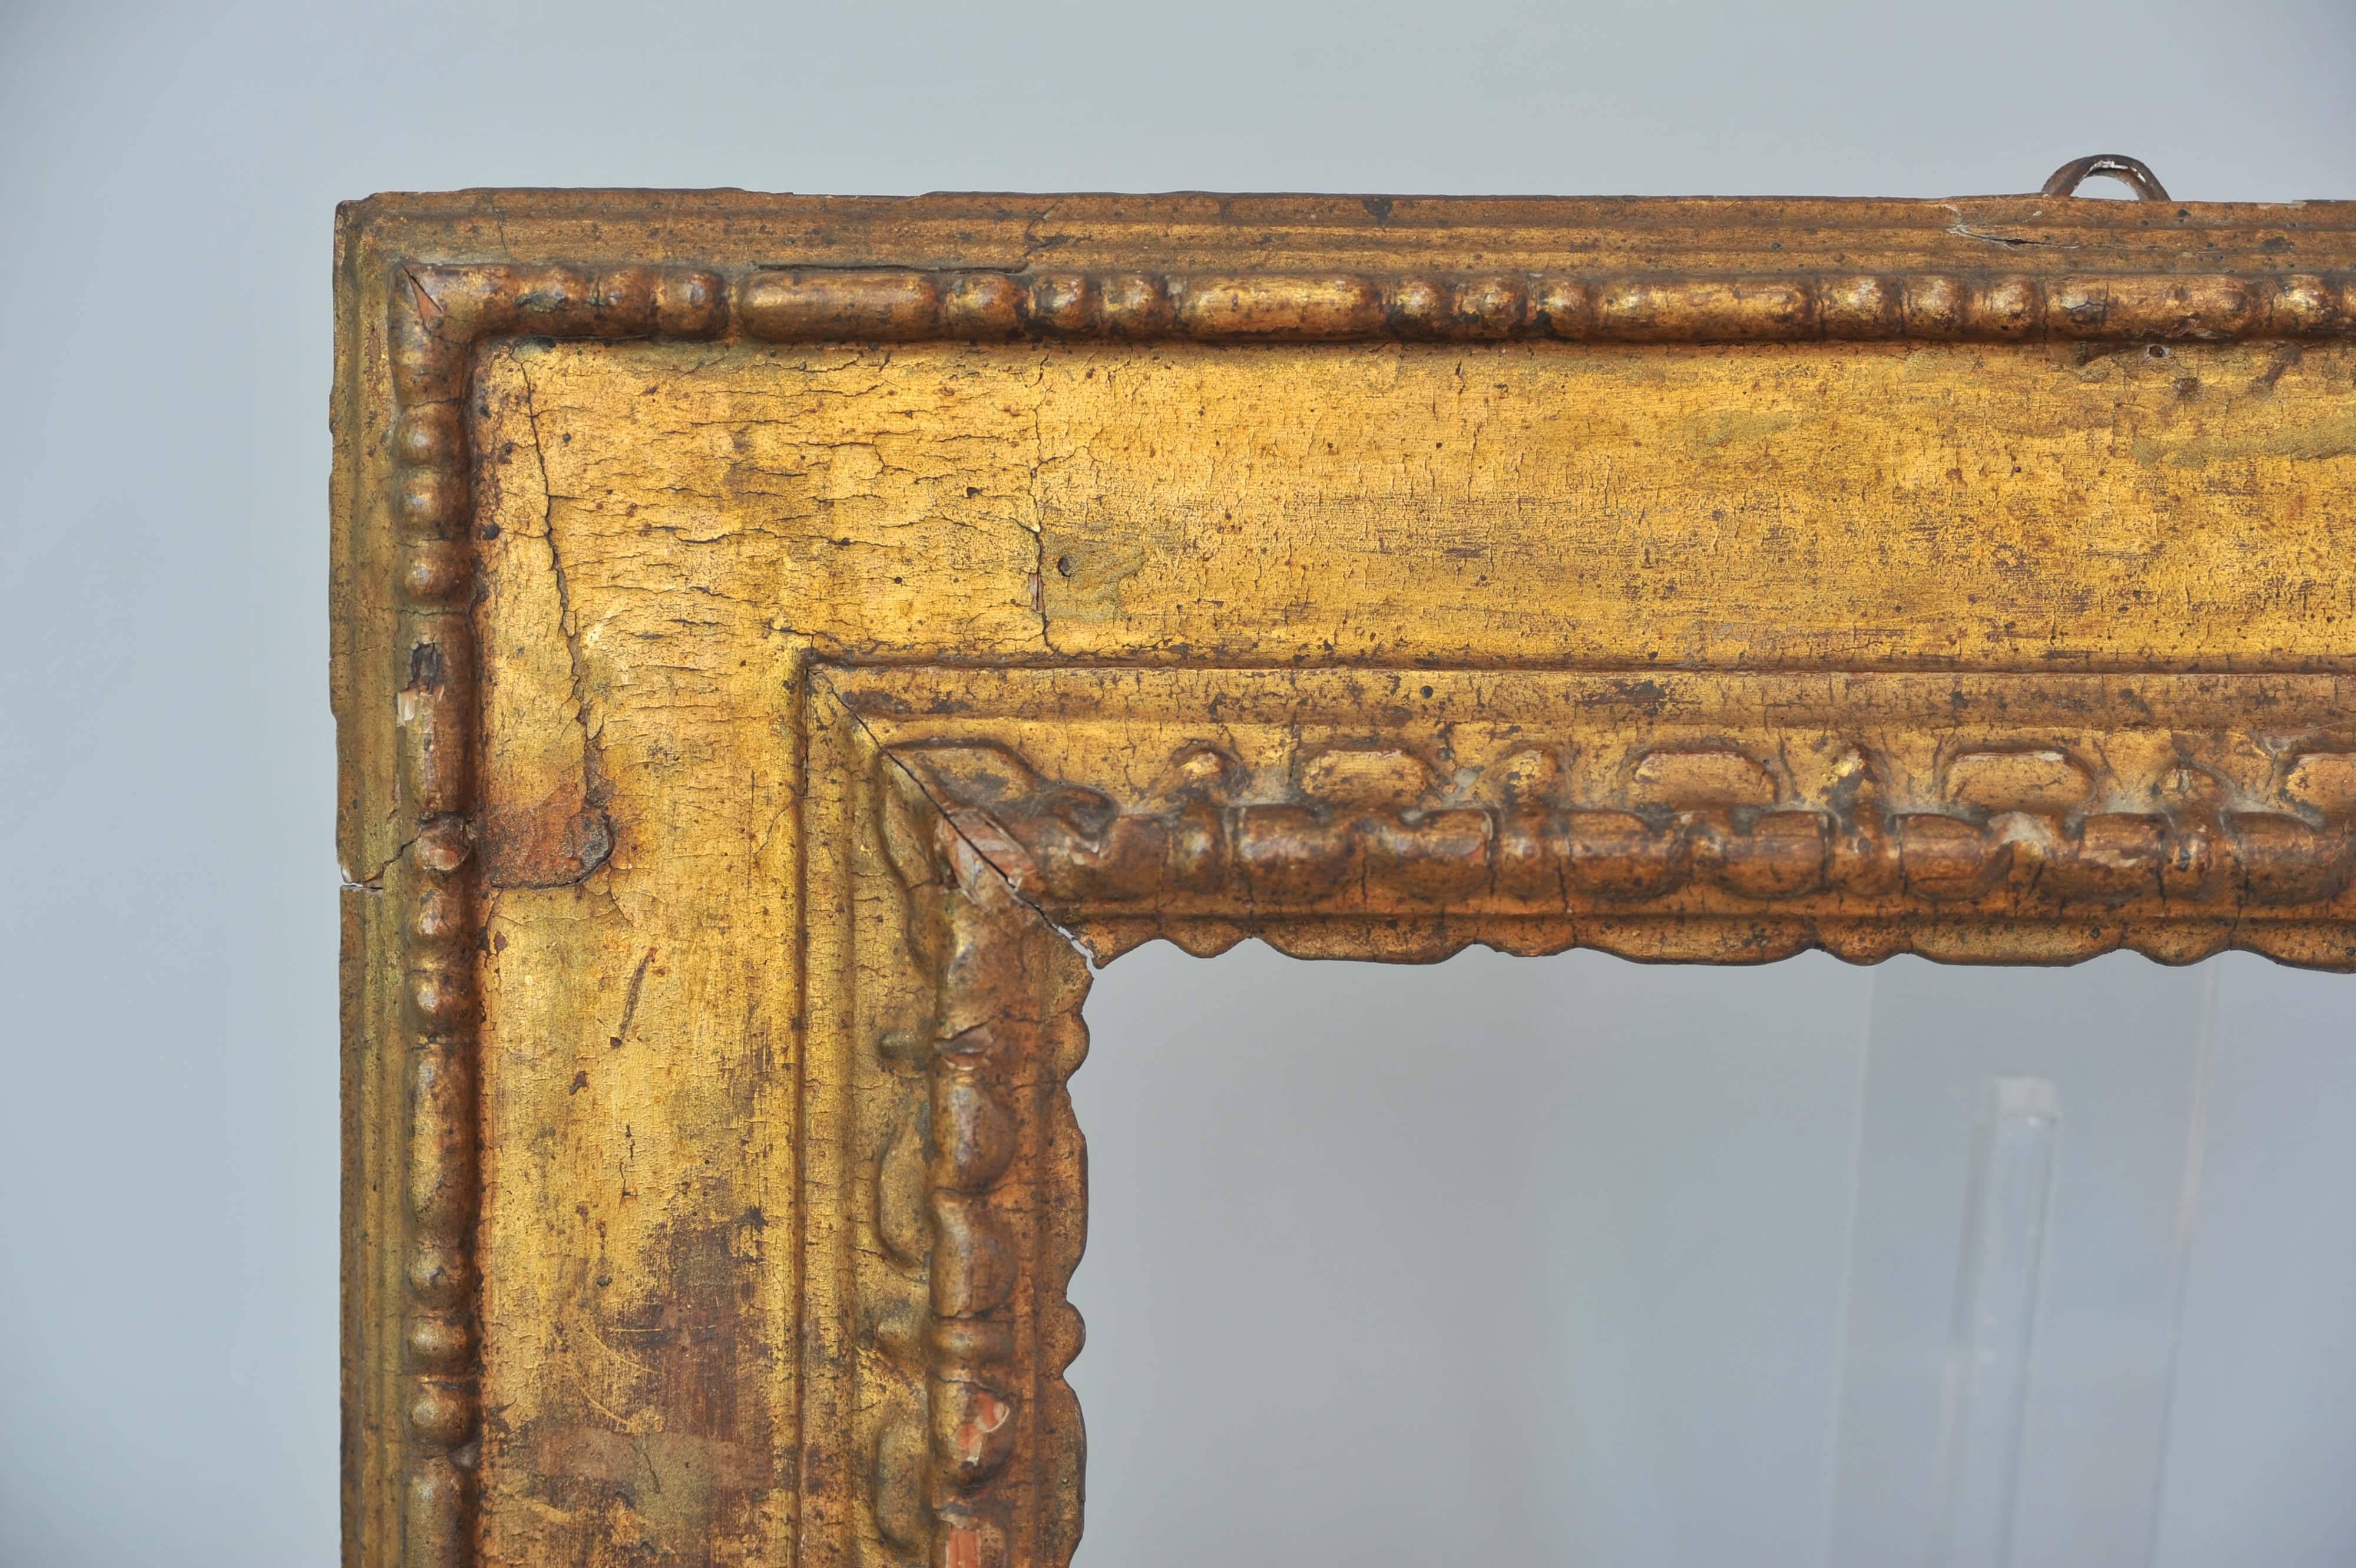 A rare and finely carved early 17th century Tuscan "a cassetta" boxed frame in light wood retaining its original gilding and never been altered of restored.
Florence, circa 1620.
Excellent frame, rare to find in such original